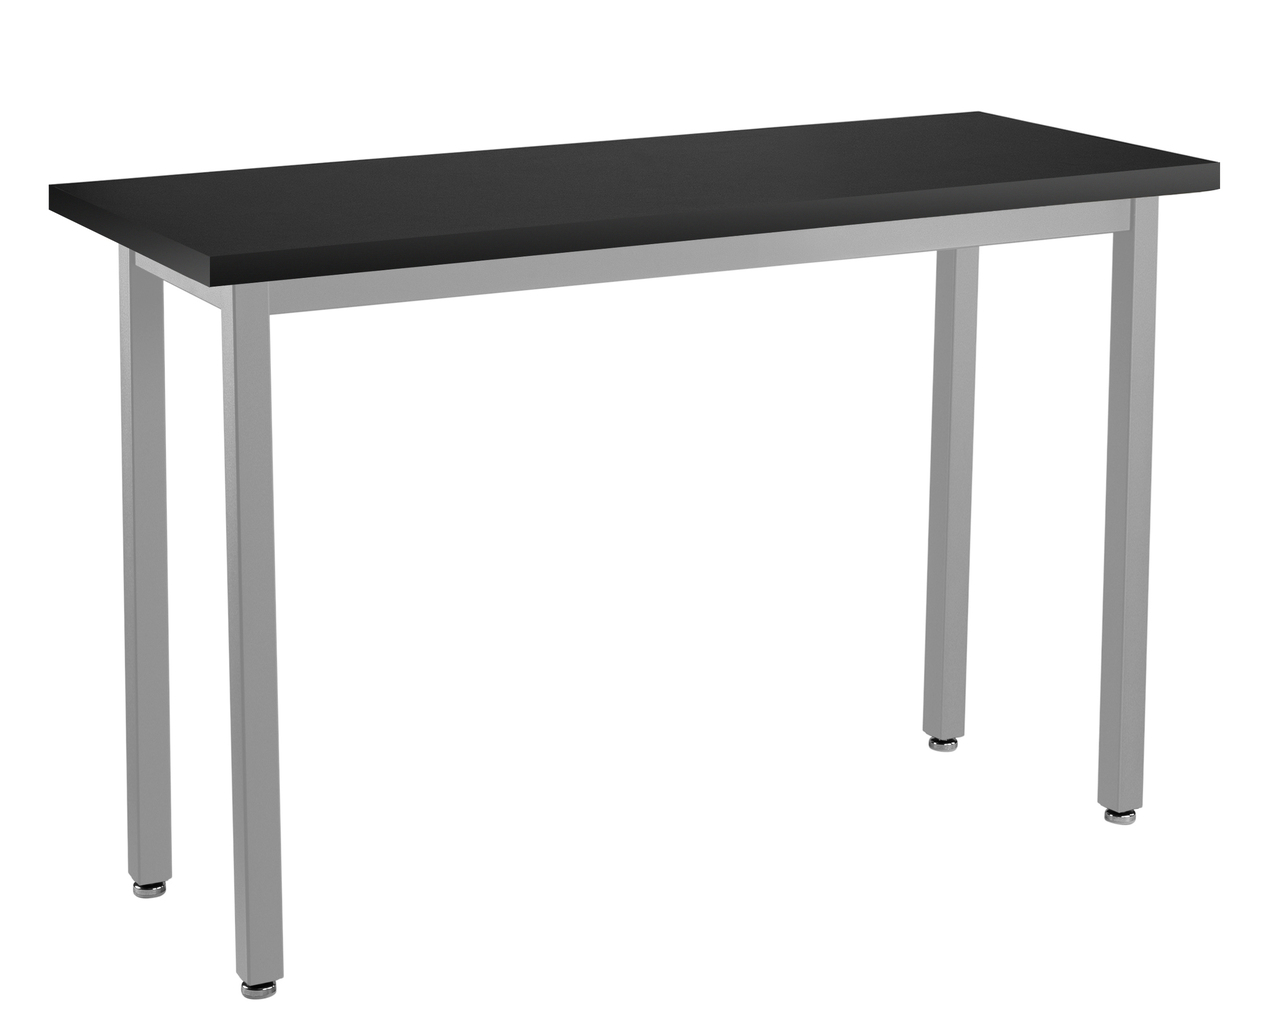 NPS Steel Science Lab Table, 18" x 48", Chemical Resistant Top - Black Surface Color